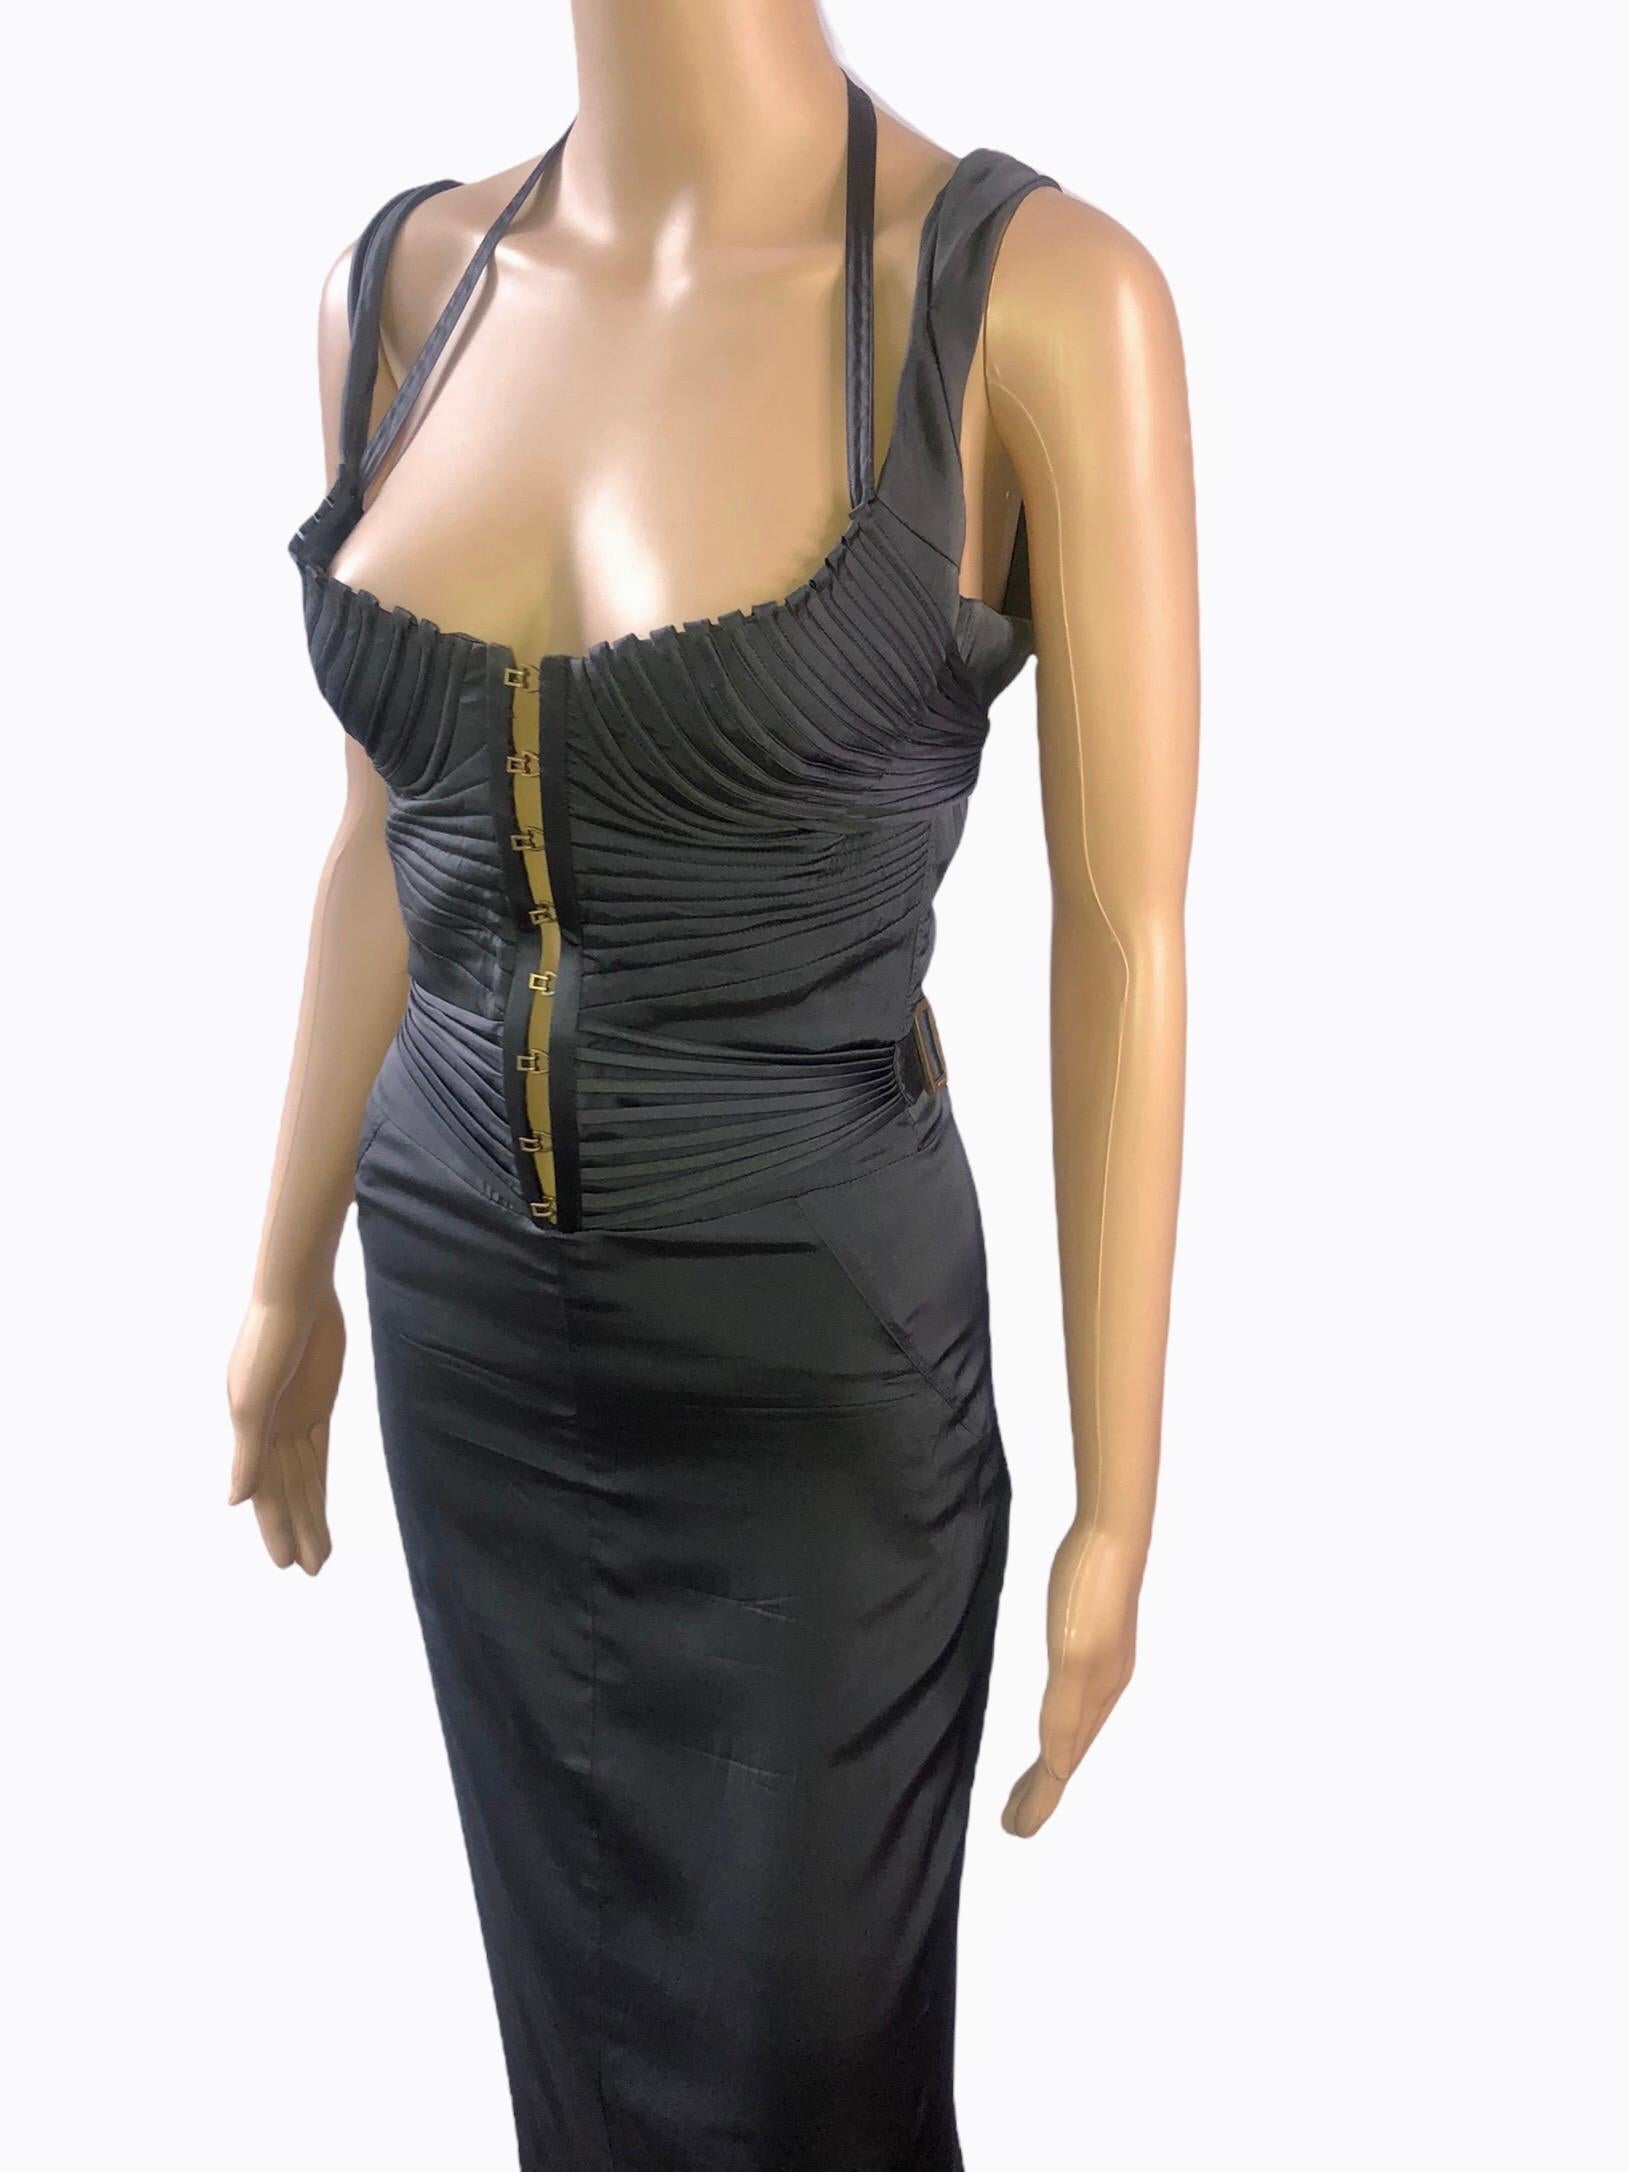 Tom Ford for Gucci F/W 2003 Bustier Corset Silk Evening Dress Gown 1